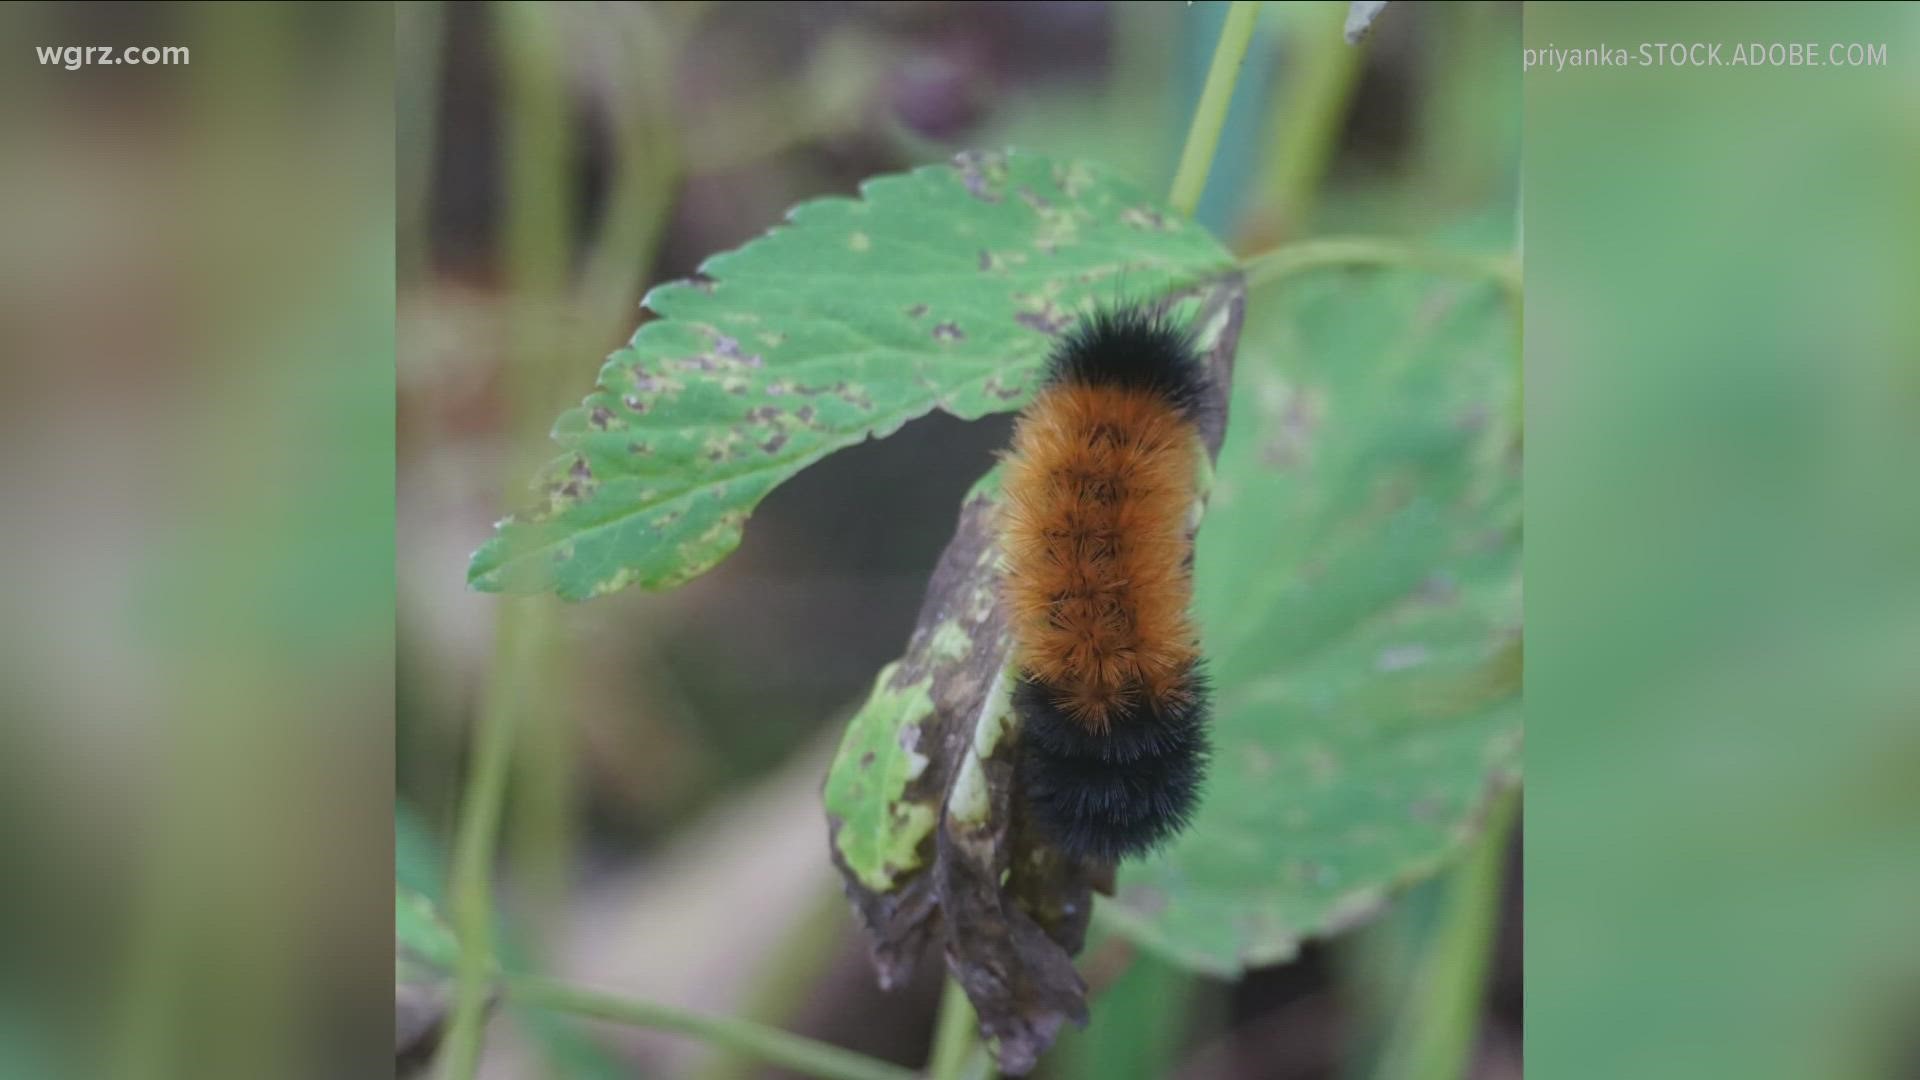 Woolly Worms predict fall/winter temps